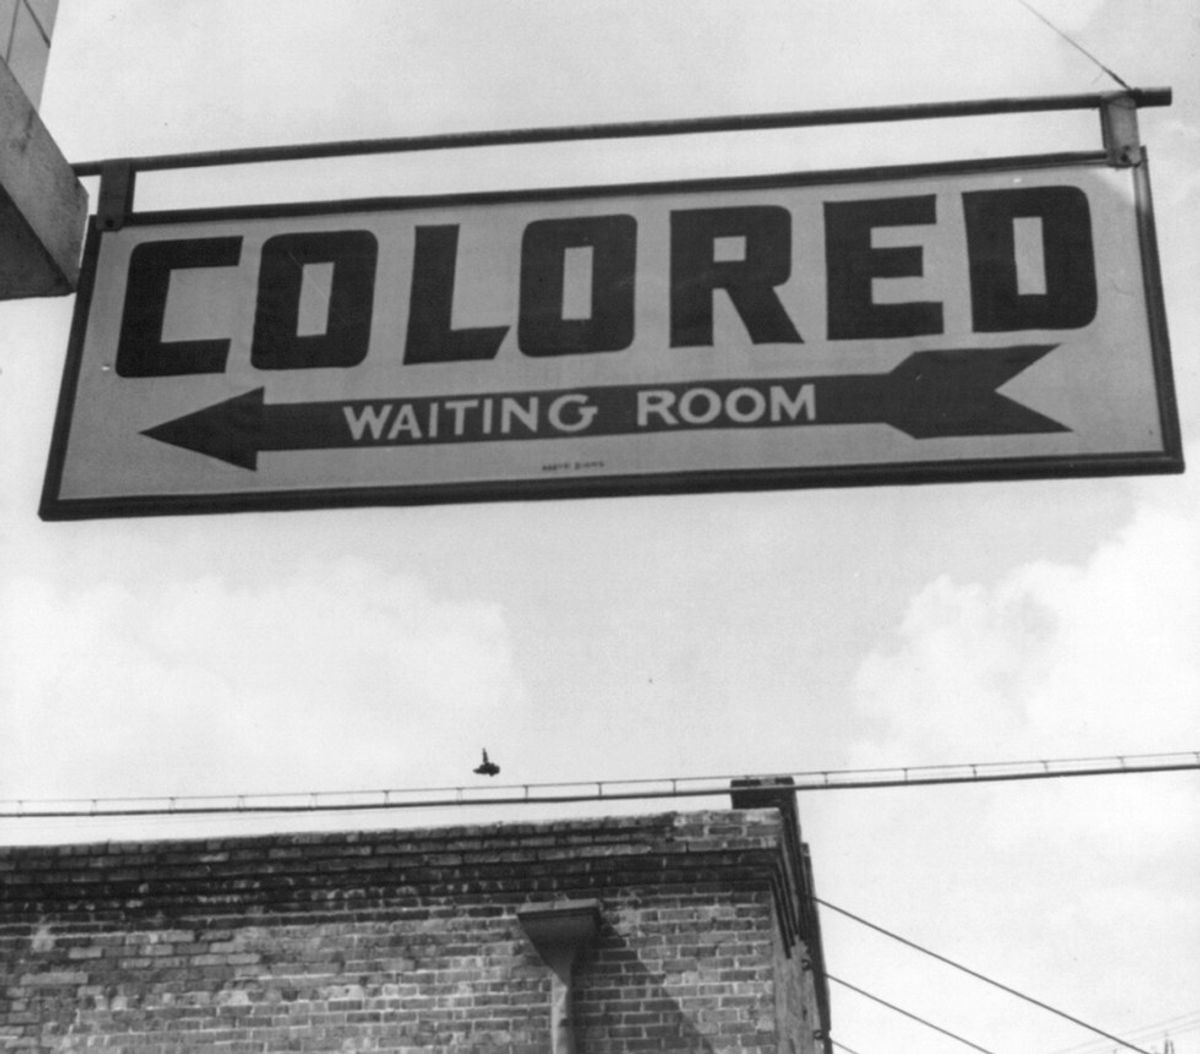 How Discrimination Continues In Today's America